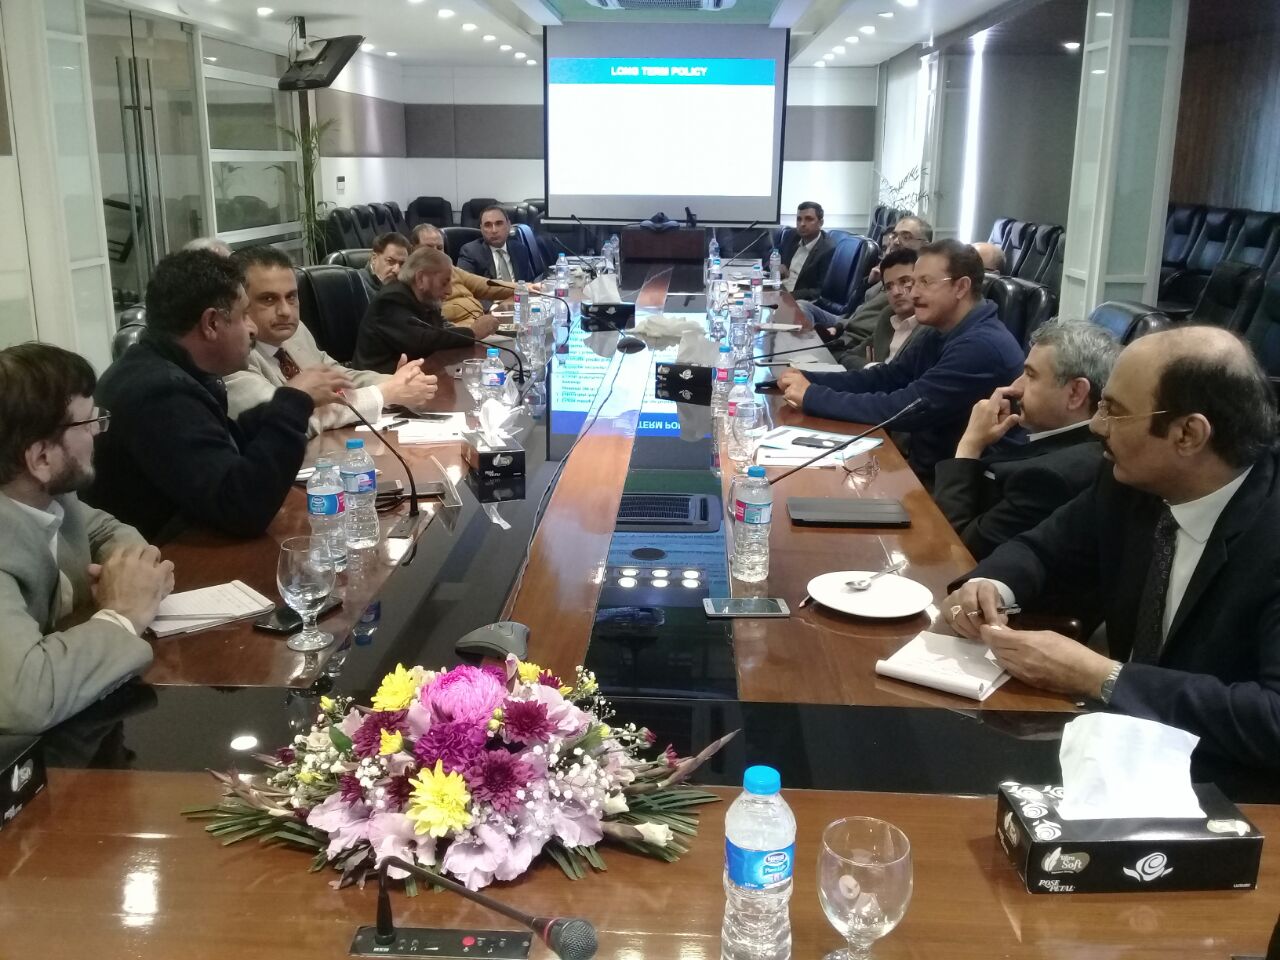 https://aptma.org.pk/wp-content/uploads/2021/10/Meeting-of-the-Textile-Industry-Associations-8.jpg